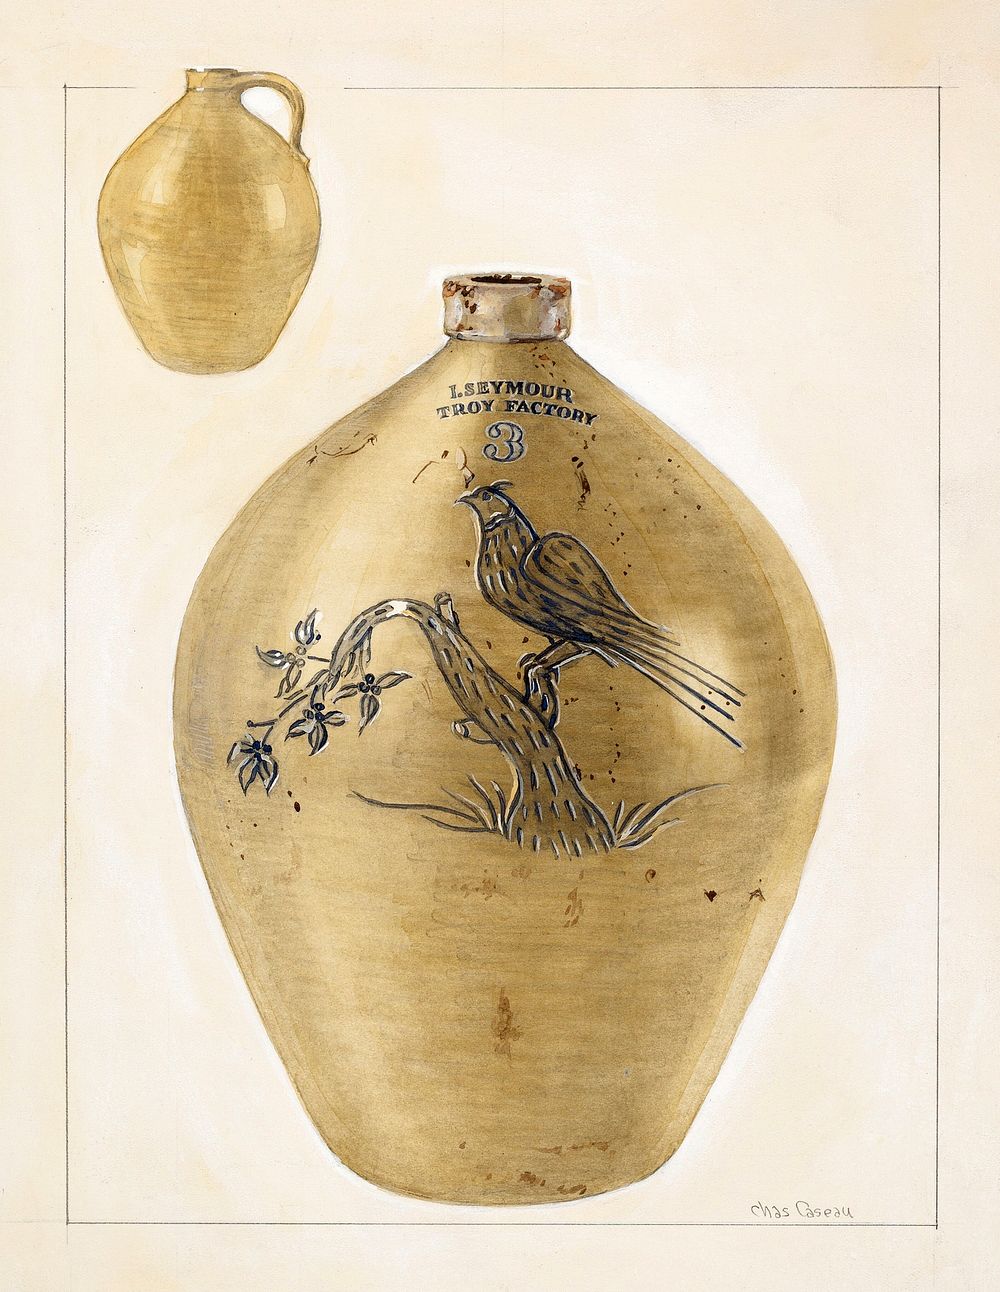 Jar (ca. 193) by Charles Caseau. Original from The National Gallery of Art. Digitally enhanced by rawpixel.